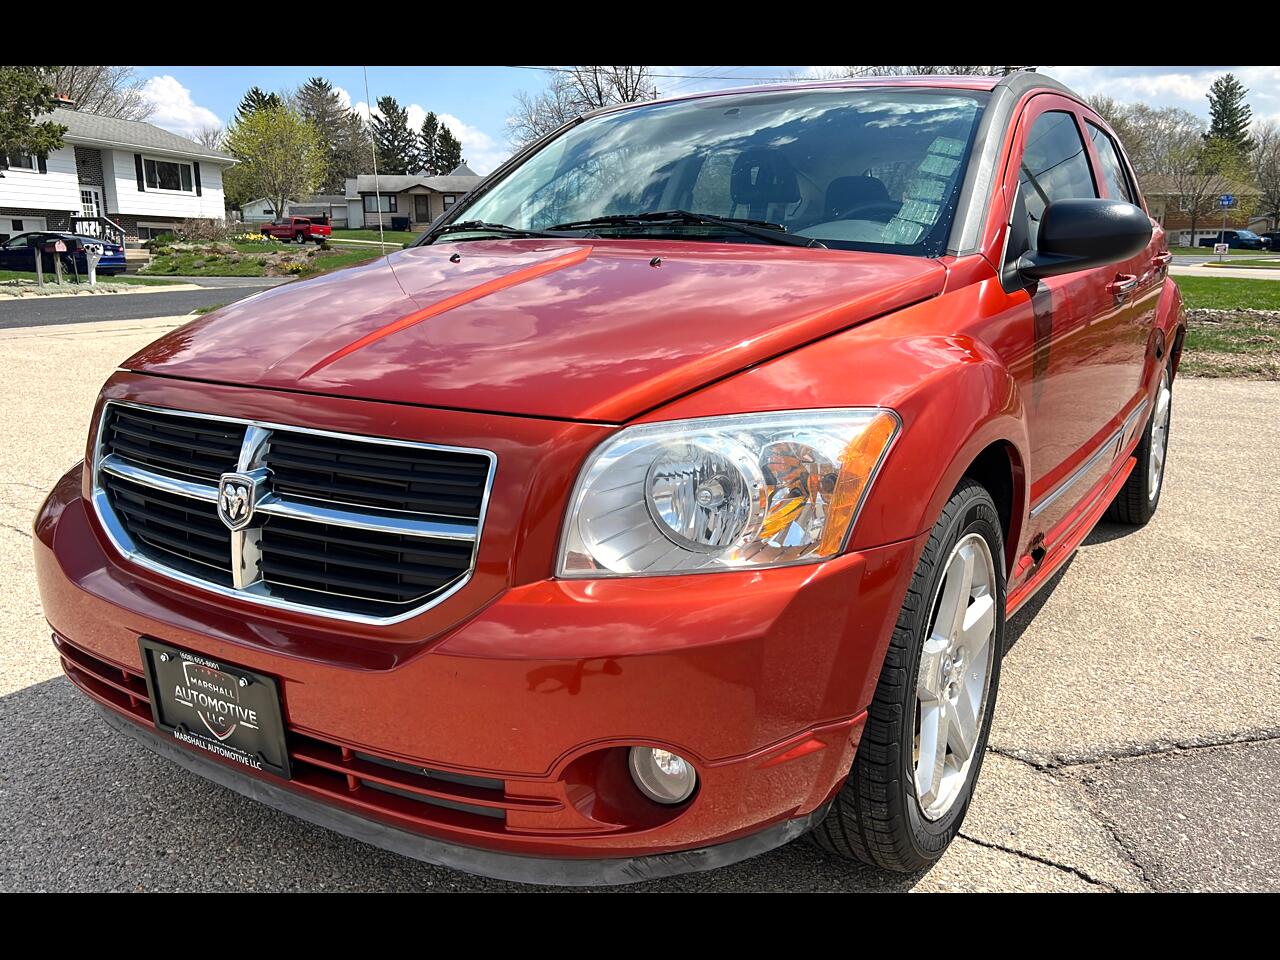 Used 2007 Dodge Caliber R/T AWD for Sale in Marshall WI 53559 Marshall  Automotive